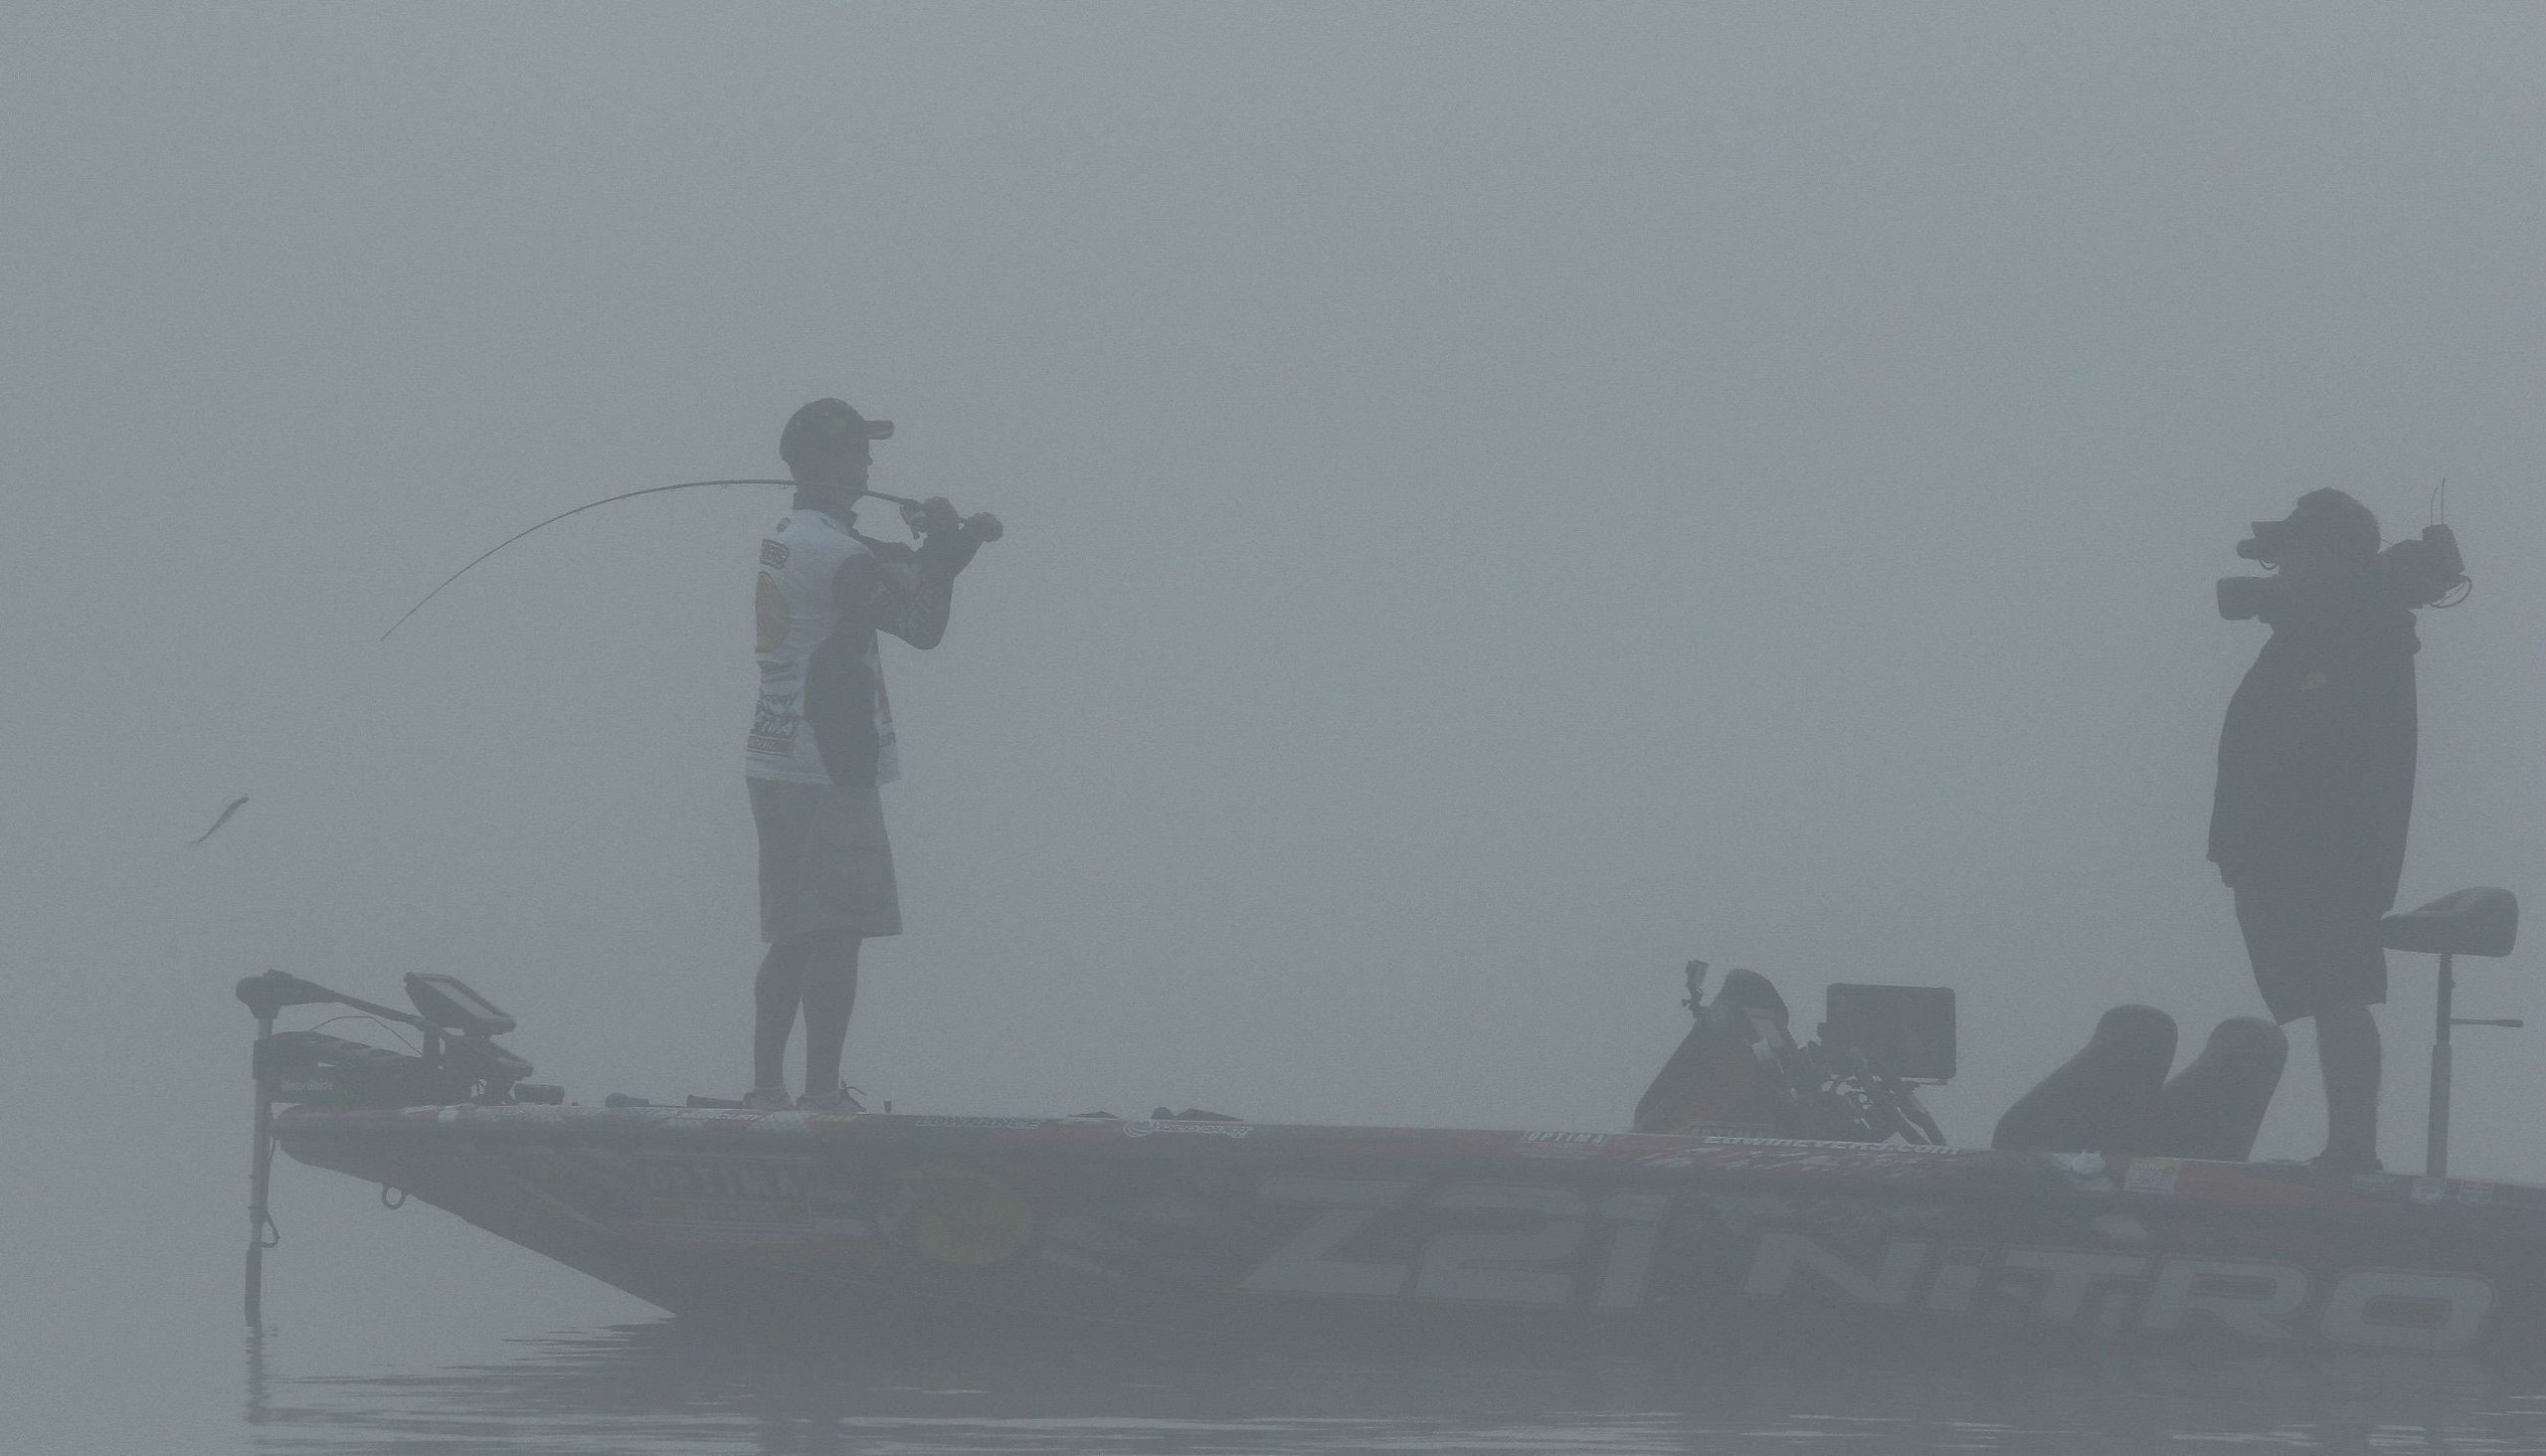 Then moved into the thick fog, where it was difficult to see more than 60 yards.